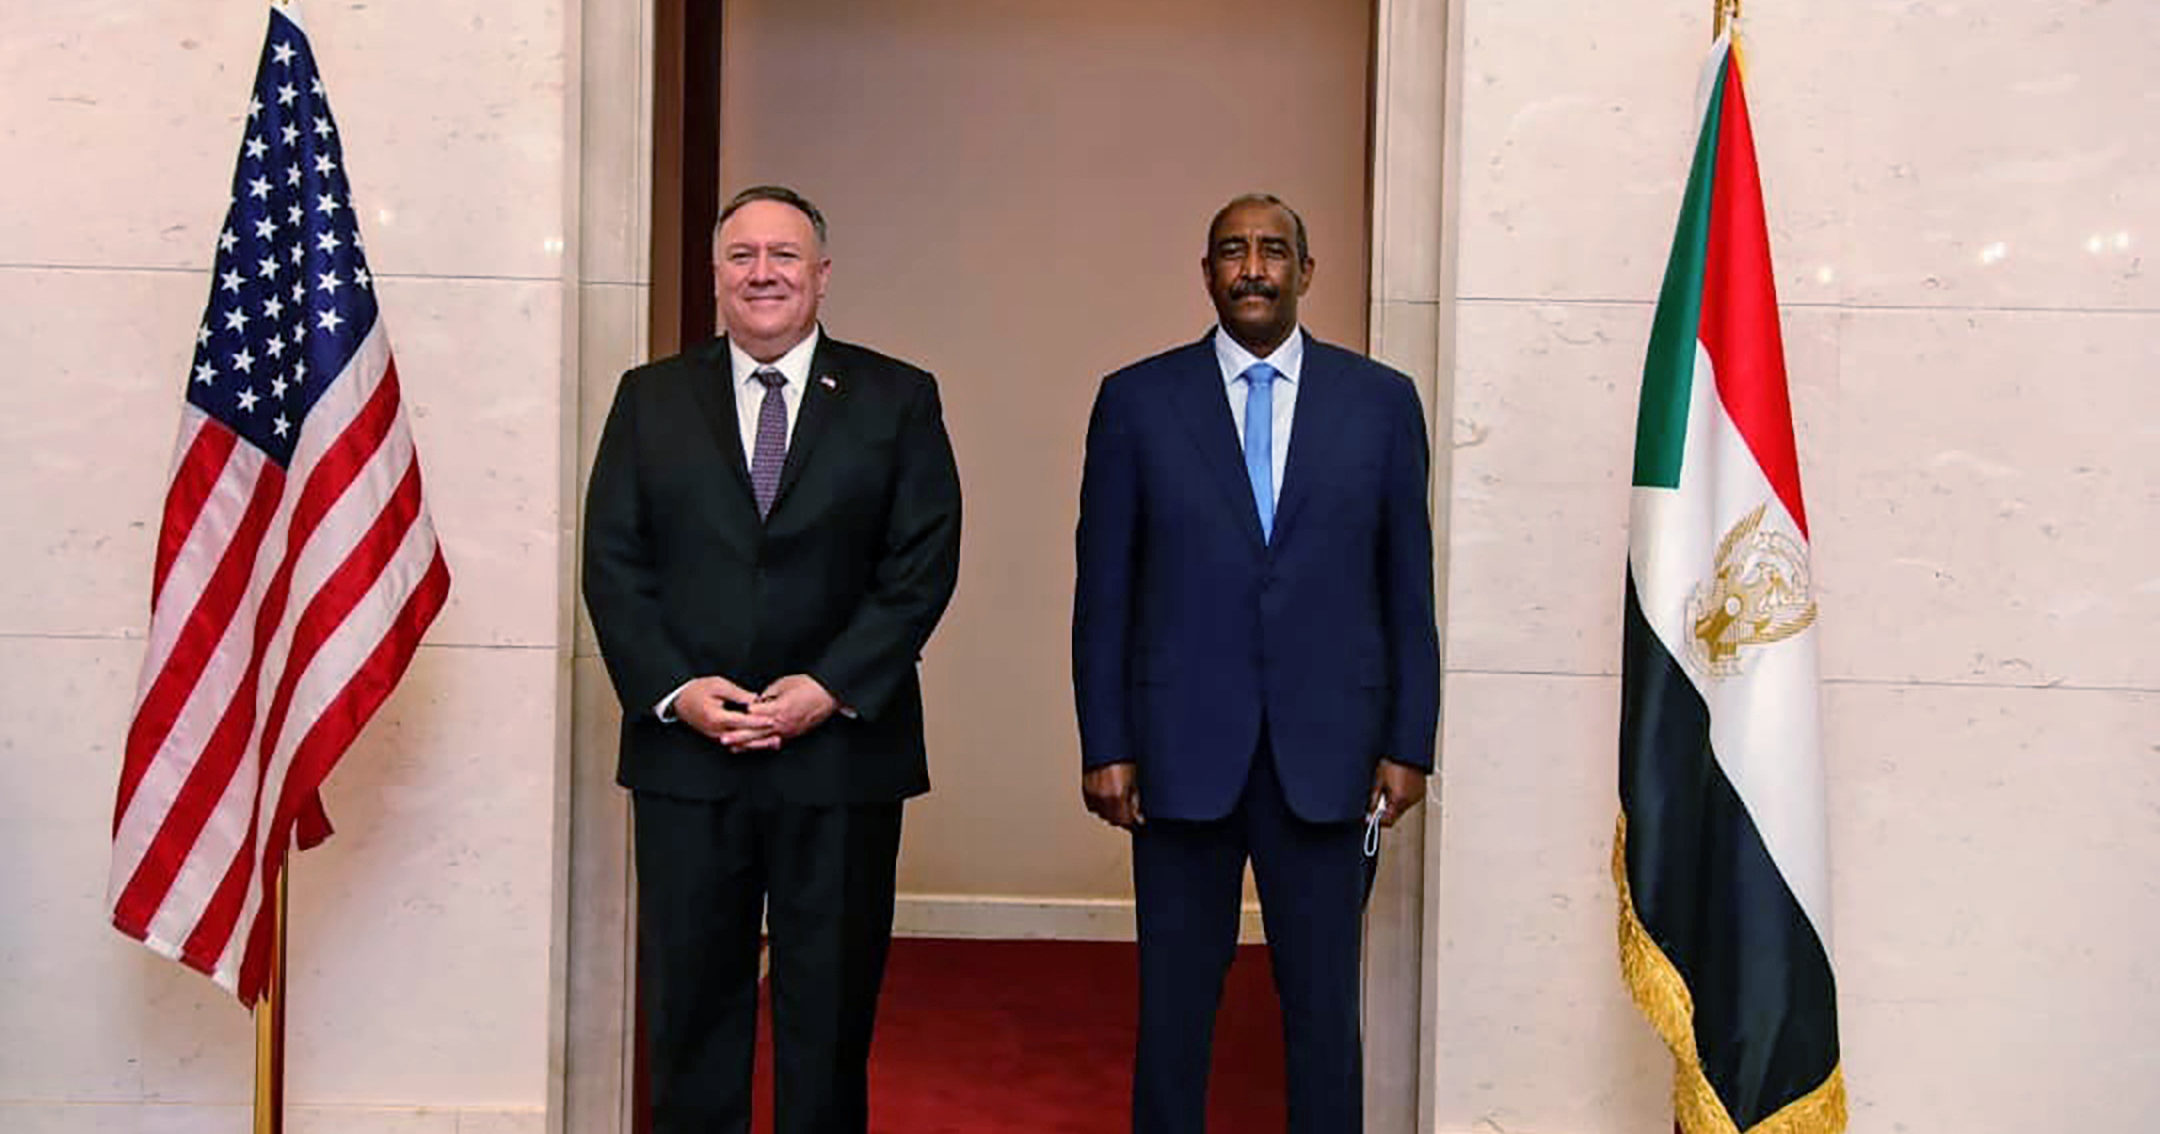 In this Aug. 25, 2020 file photo, US Secretary of State Mike Pompeo stands with Sudanese Gen. Abdel-Fattah Burhan in Khartoum, Sudan.